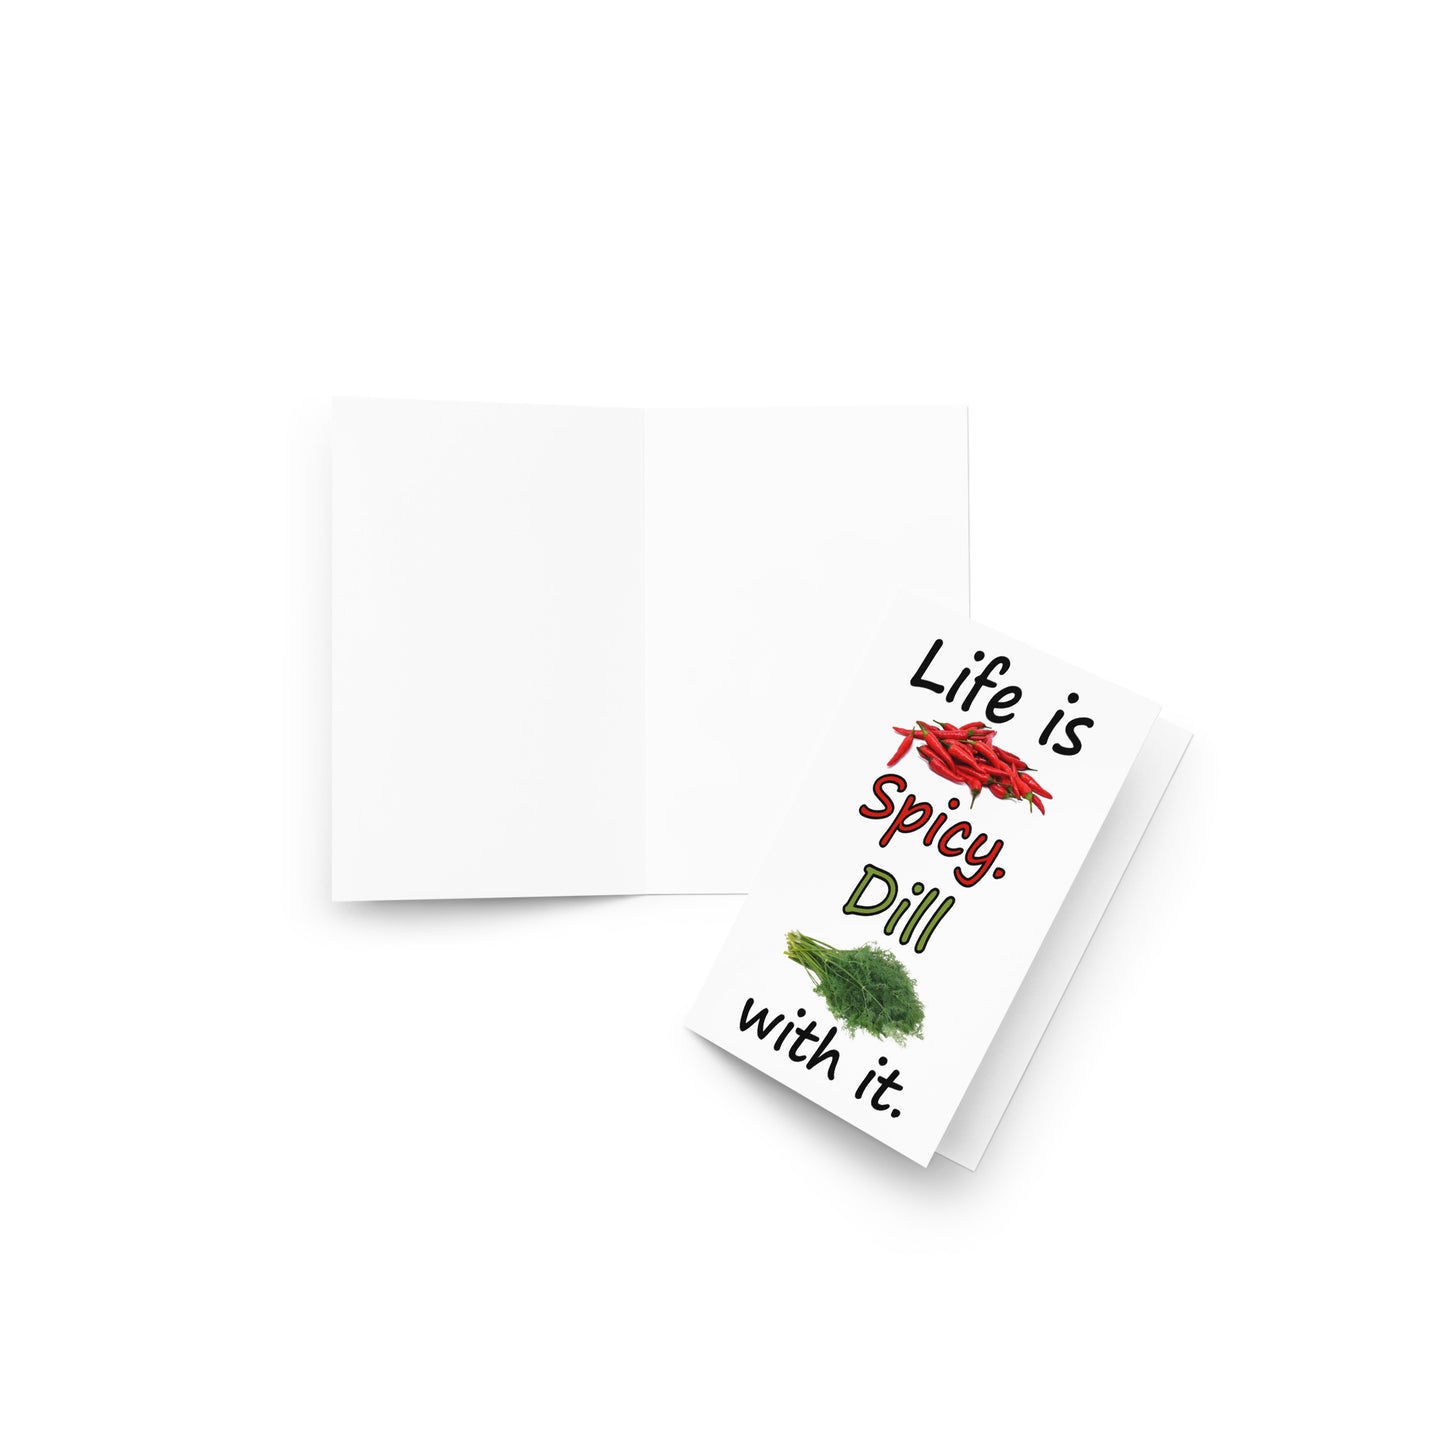 4 by 6 inch Life Is Spicy greeting card. Features Life is Spicy, Dill With It text, with image of chili peppers and dill weed on the front. The inside is blank. Comes with a white envelope. Card is made of durable paperboard with vibrant printing. Image shows front cover and blank inside.